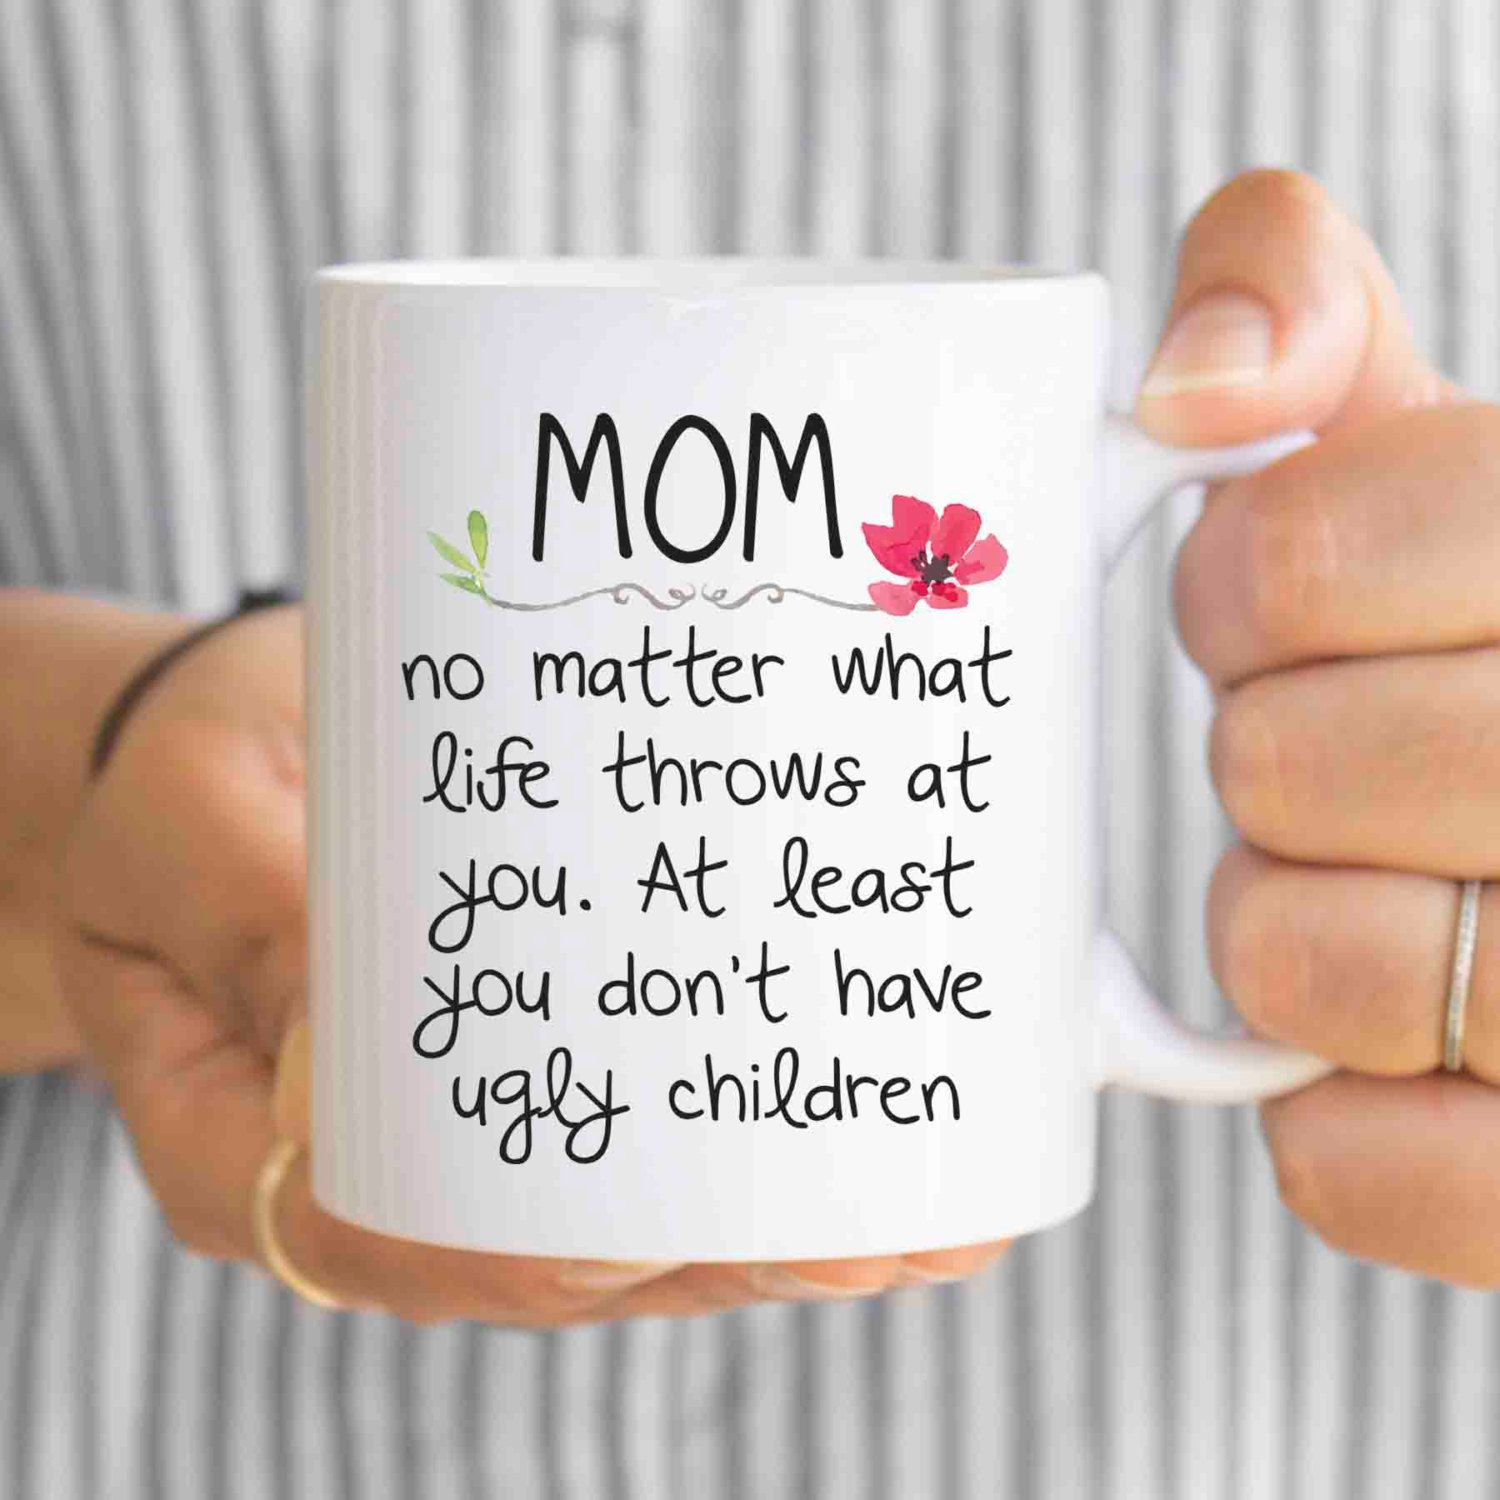 Ideas For Mothers Day Gift
 15 Unique Mother s Day Gifts Ideas 2019 For Mom – Best